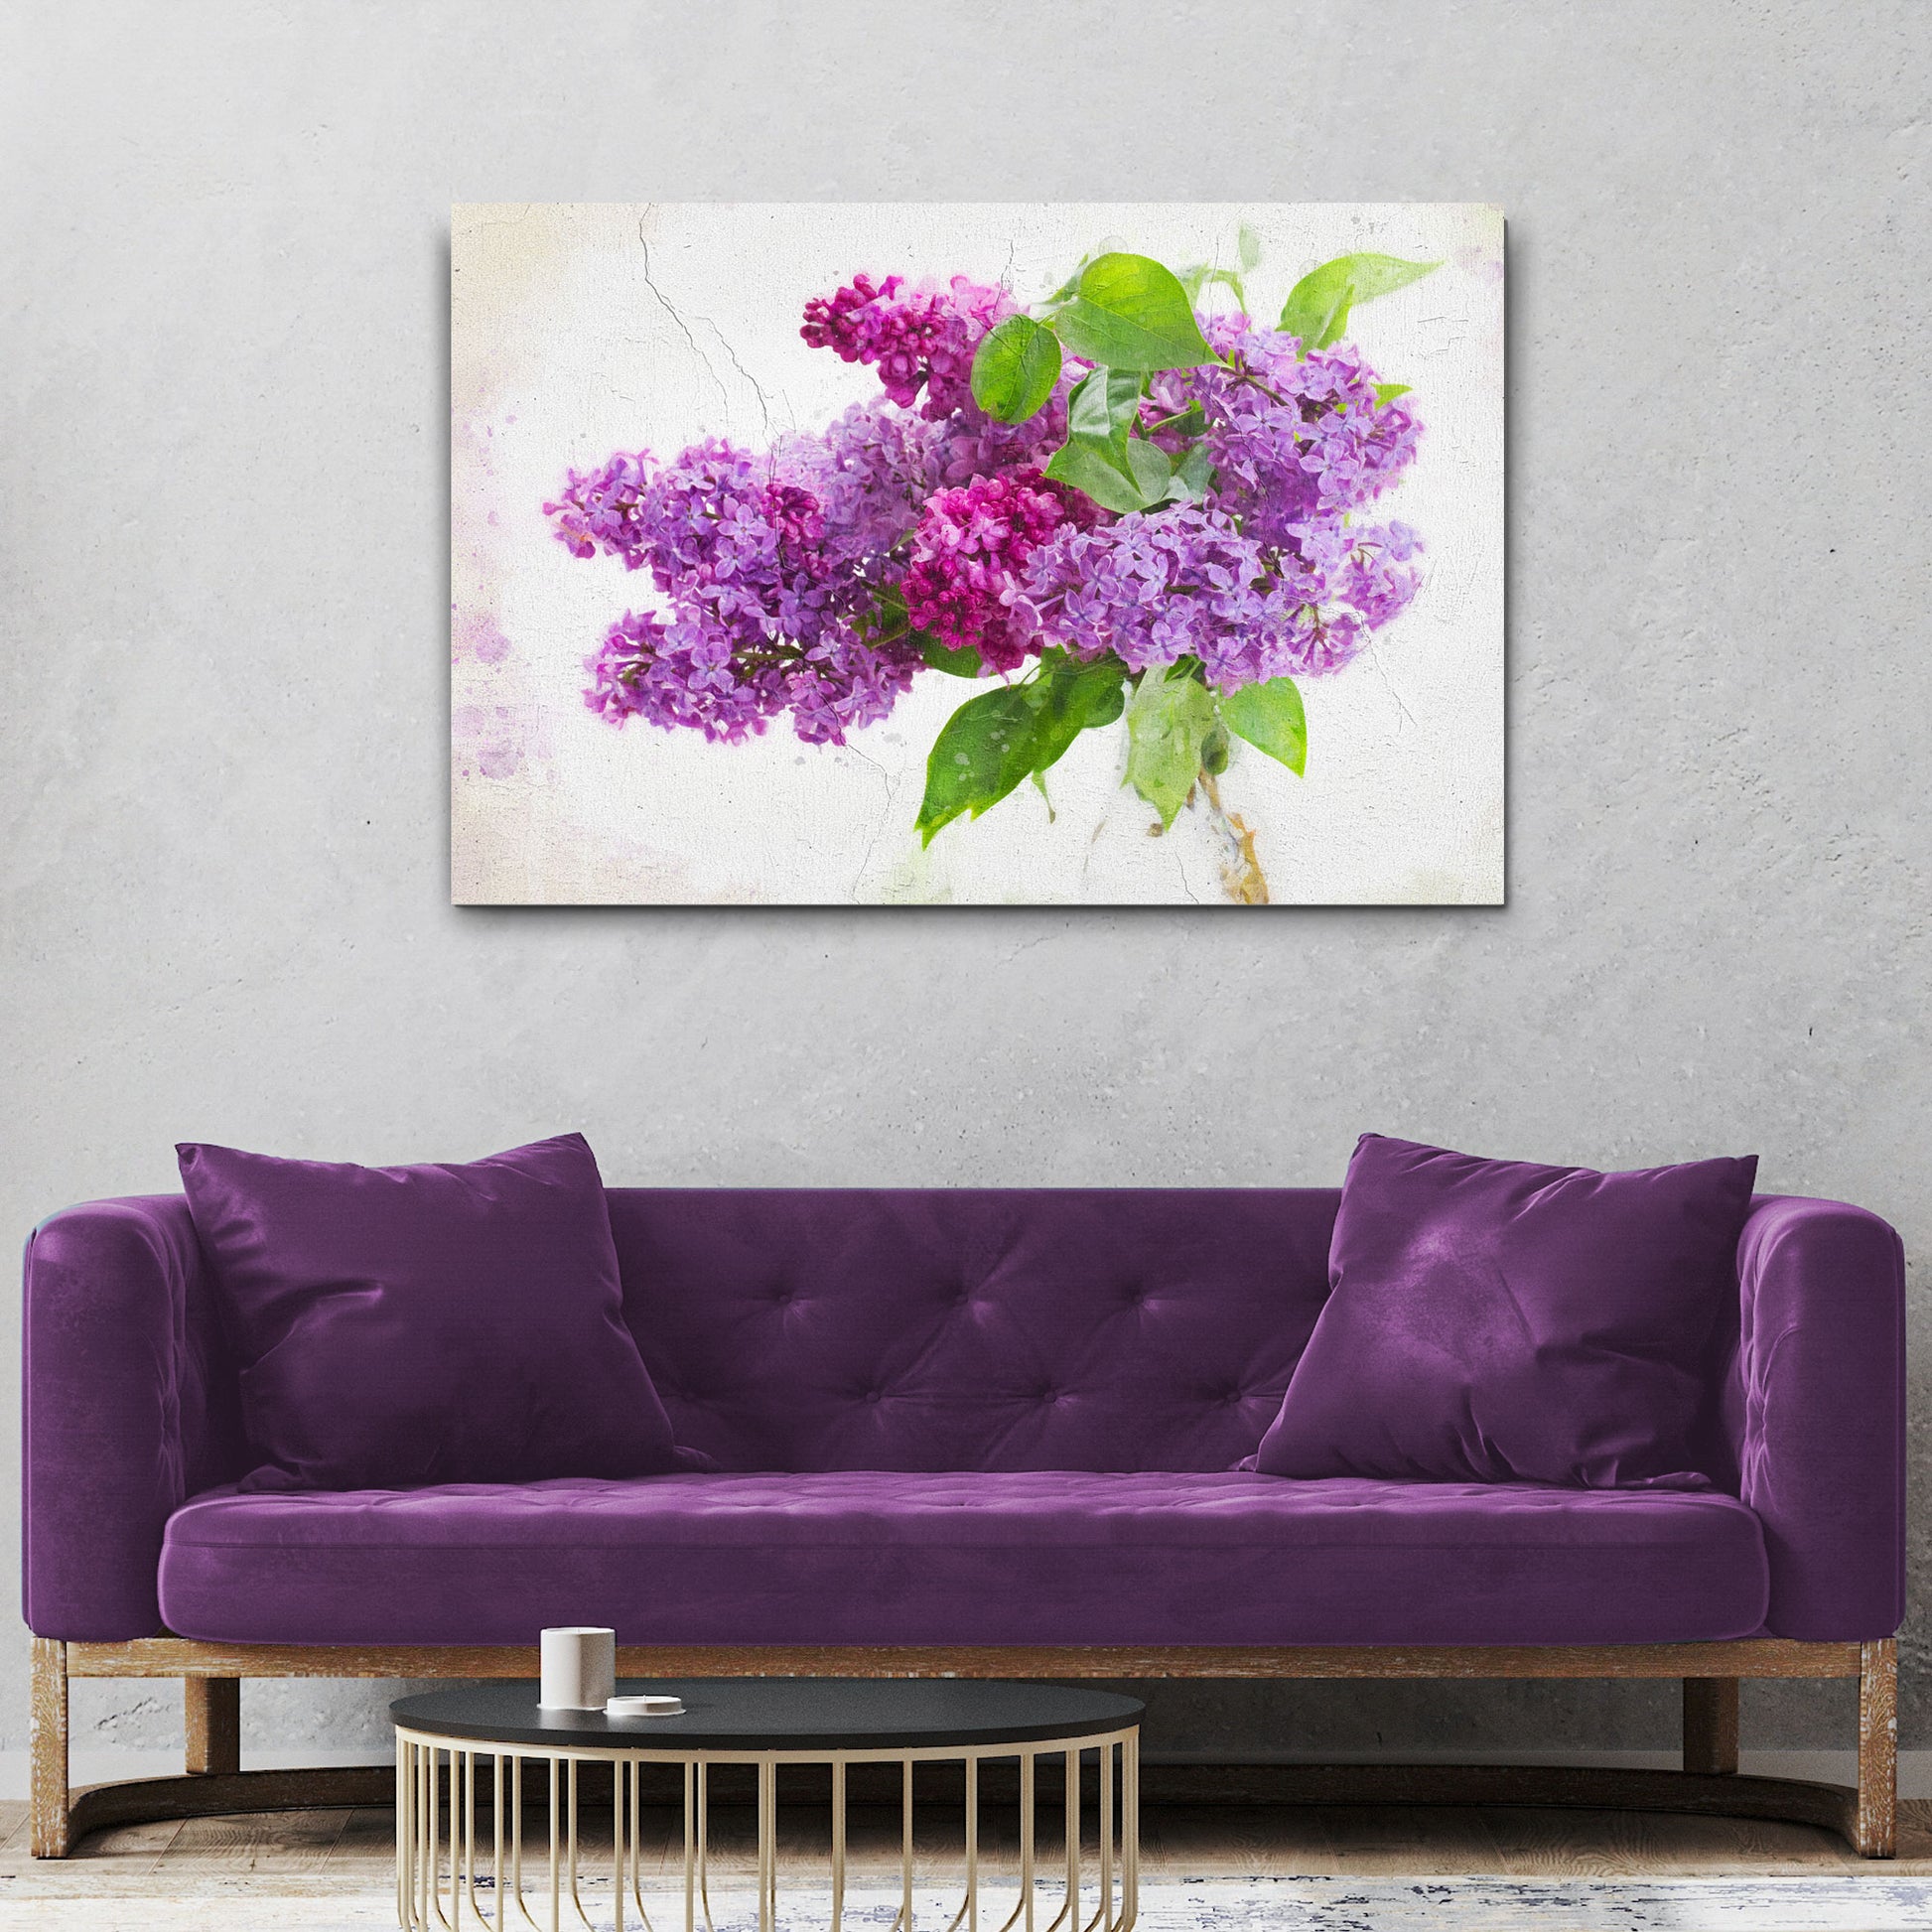 Flowers Lilac Painting Canvas Wall Art - Image by Tailored Canvases